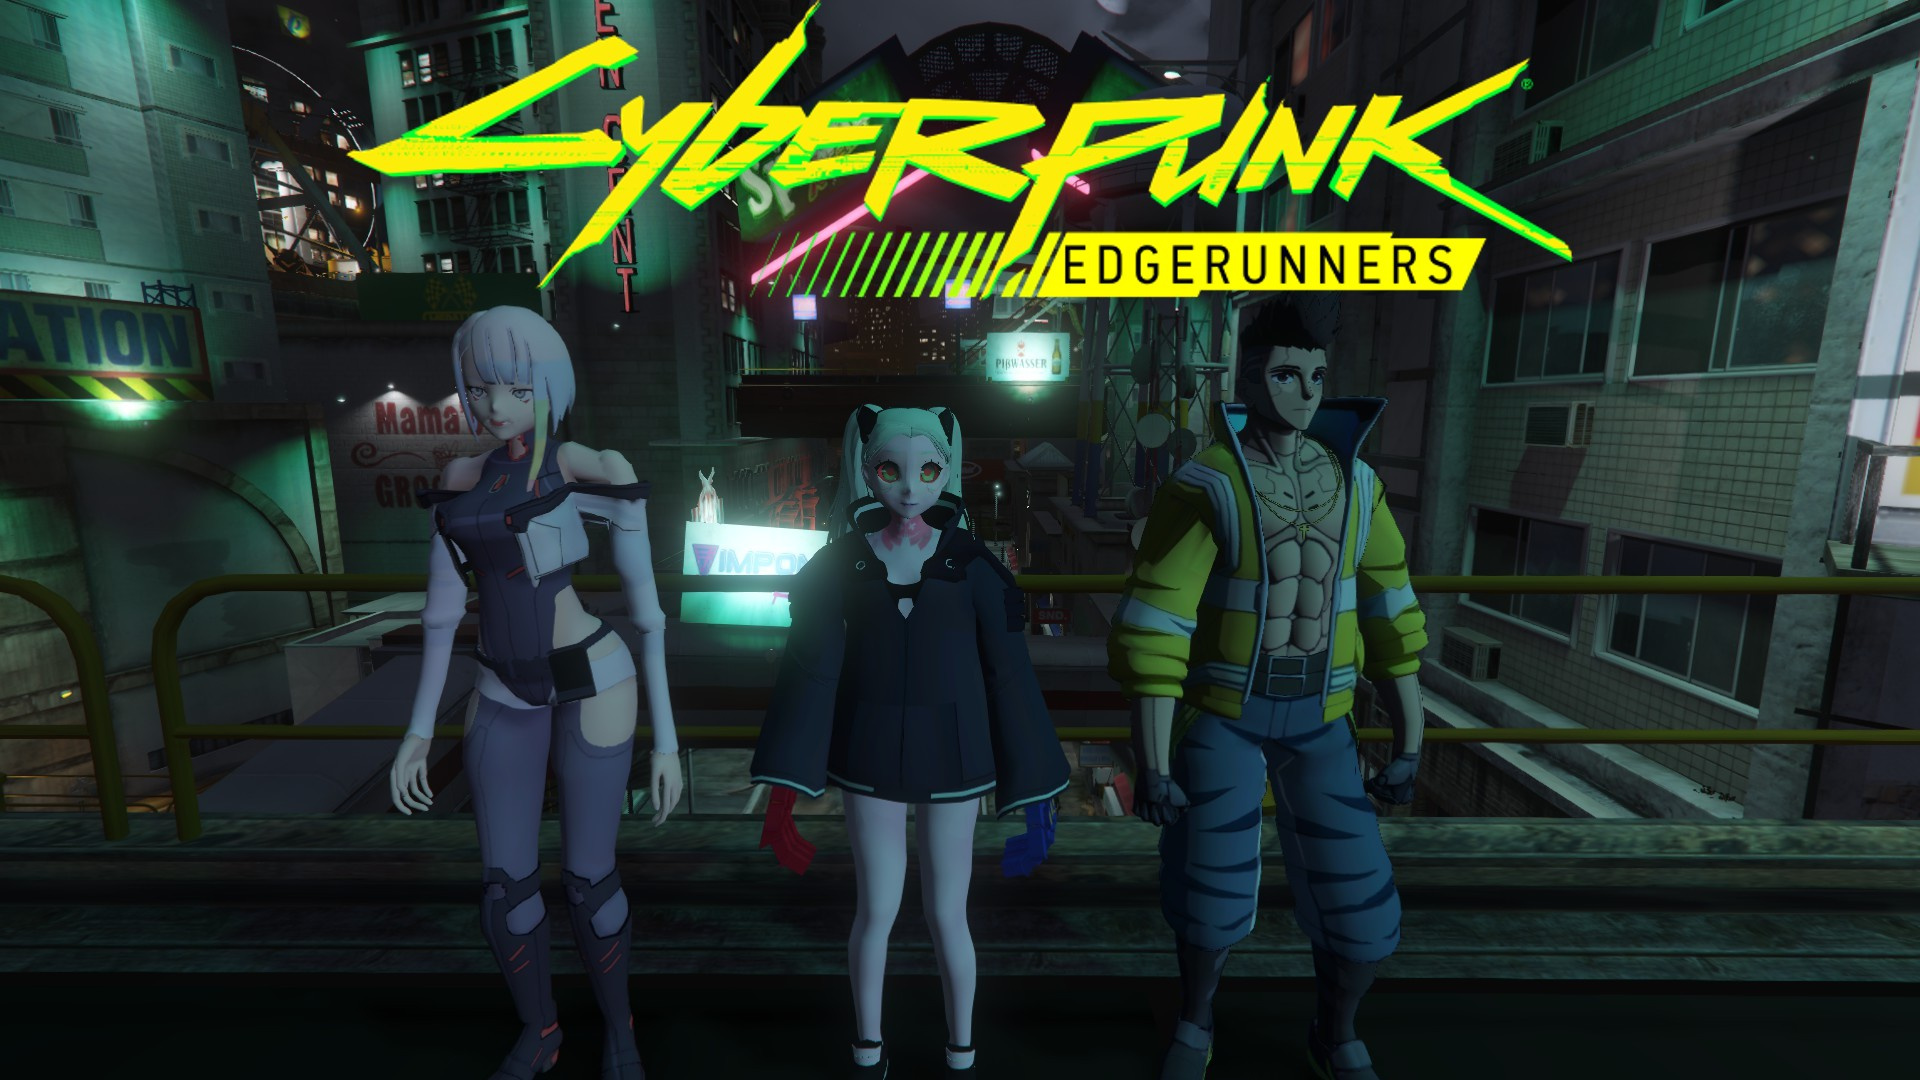 Cyberpunk Mod Adds Lucy and Rebecca's Weapons From the Edgerunners